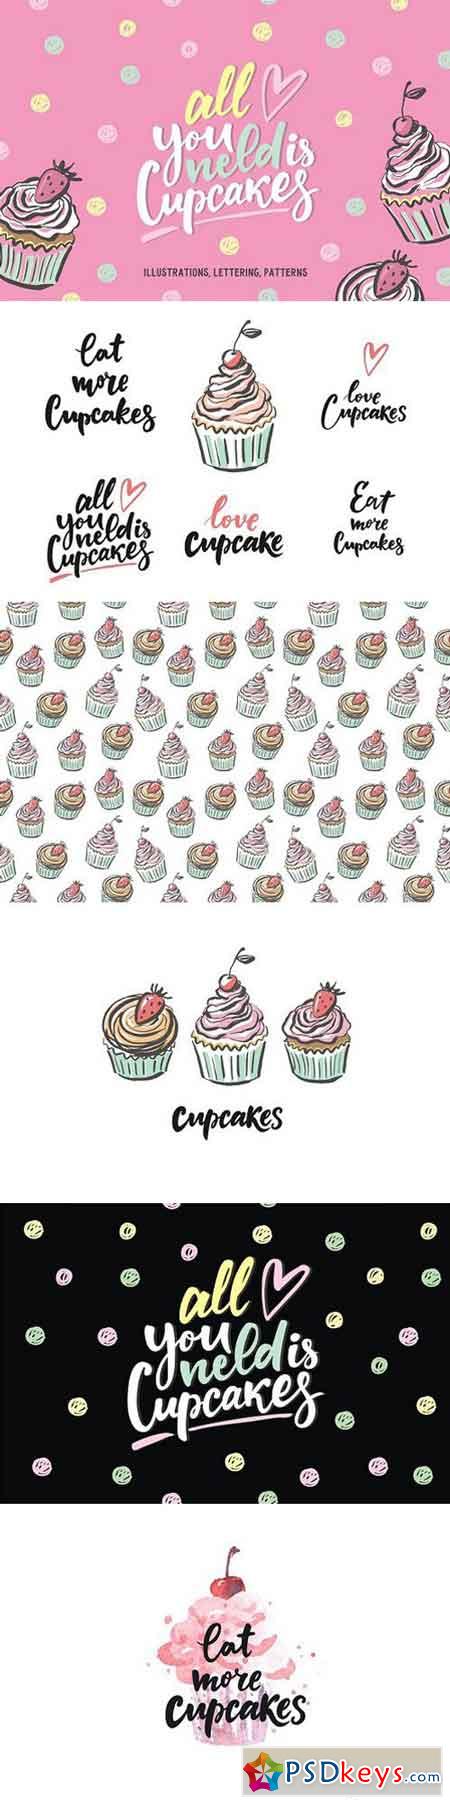 Cupcake pattern, lettering, cards 1226937